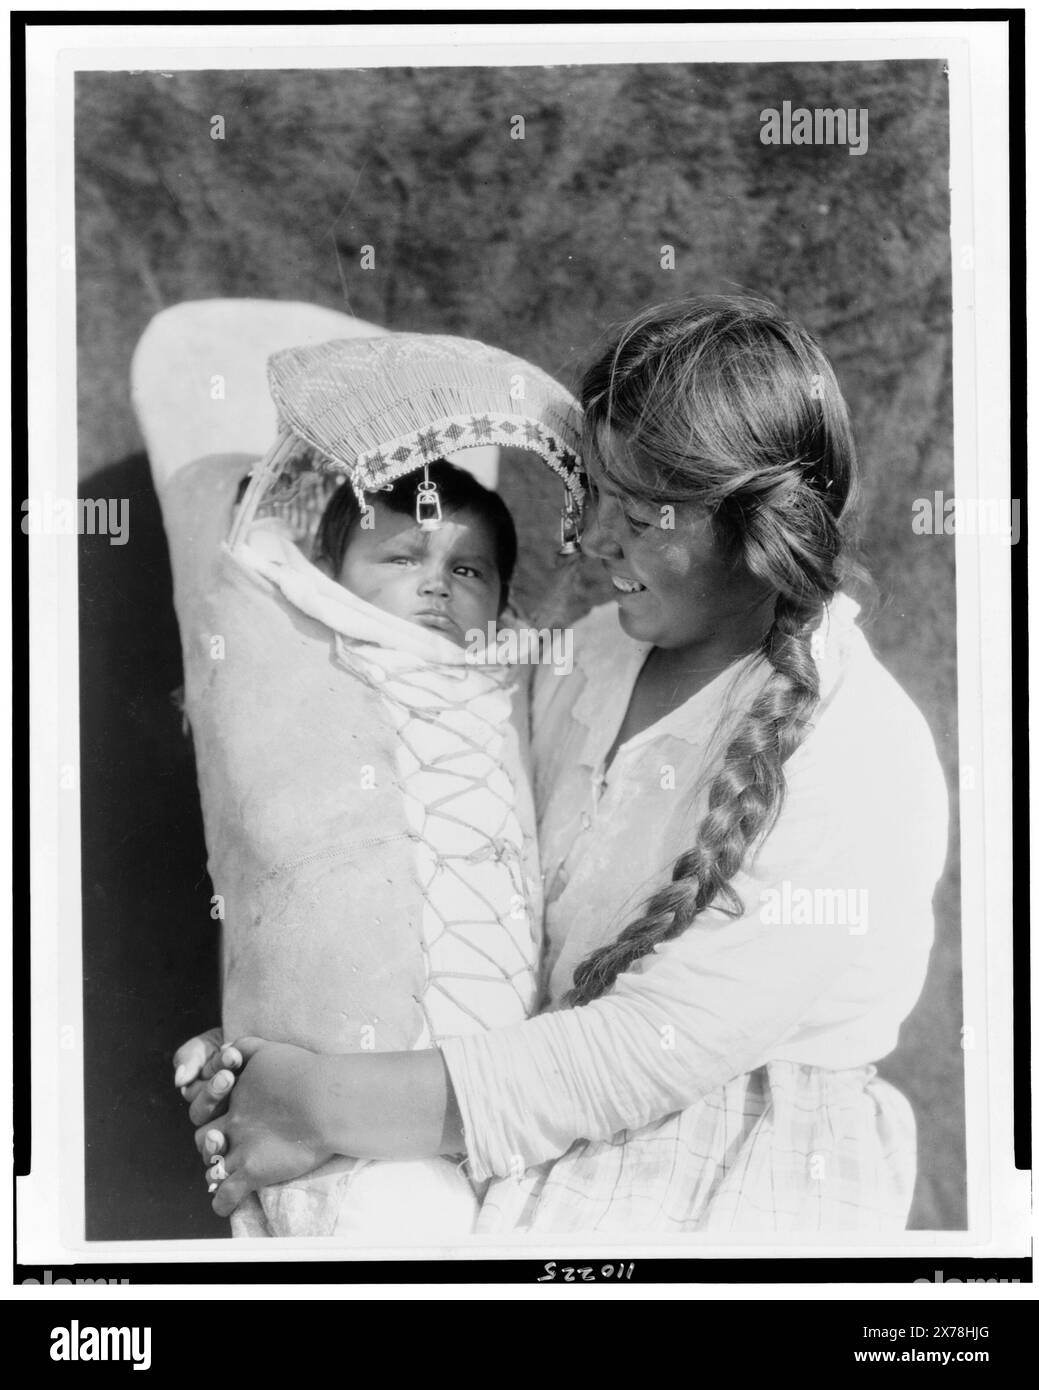 Achomawi mother and child, Edward S. Curtis Collection., Curtis no. 3941., Published in: The North American Indian / Edward S. Curtis. [Seattle, Wash.] : Edward S. Curtis, 1907-30 suppl., v. 13, p. 136.. Indians of North America, California, 1920-1930. , Achomawi Indians, 1920-1930. , Mothers & children, California, 1920-1930. Stock Photo